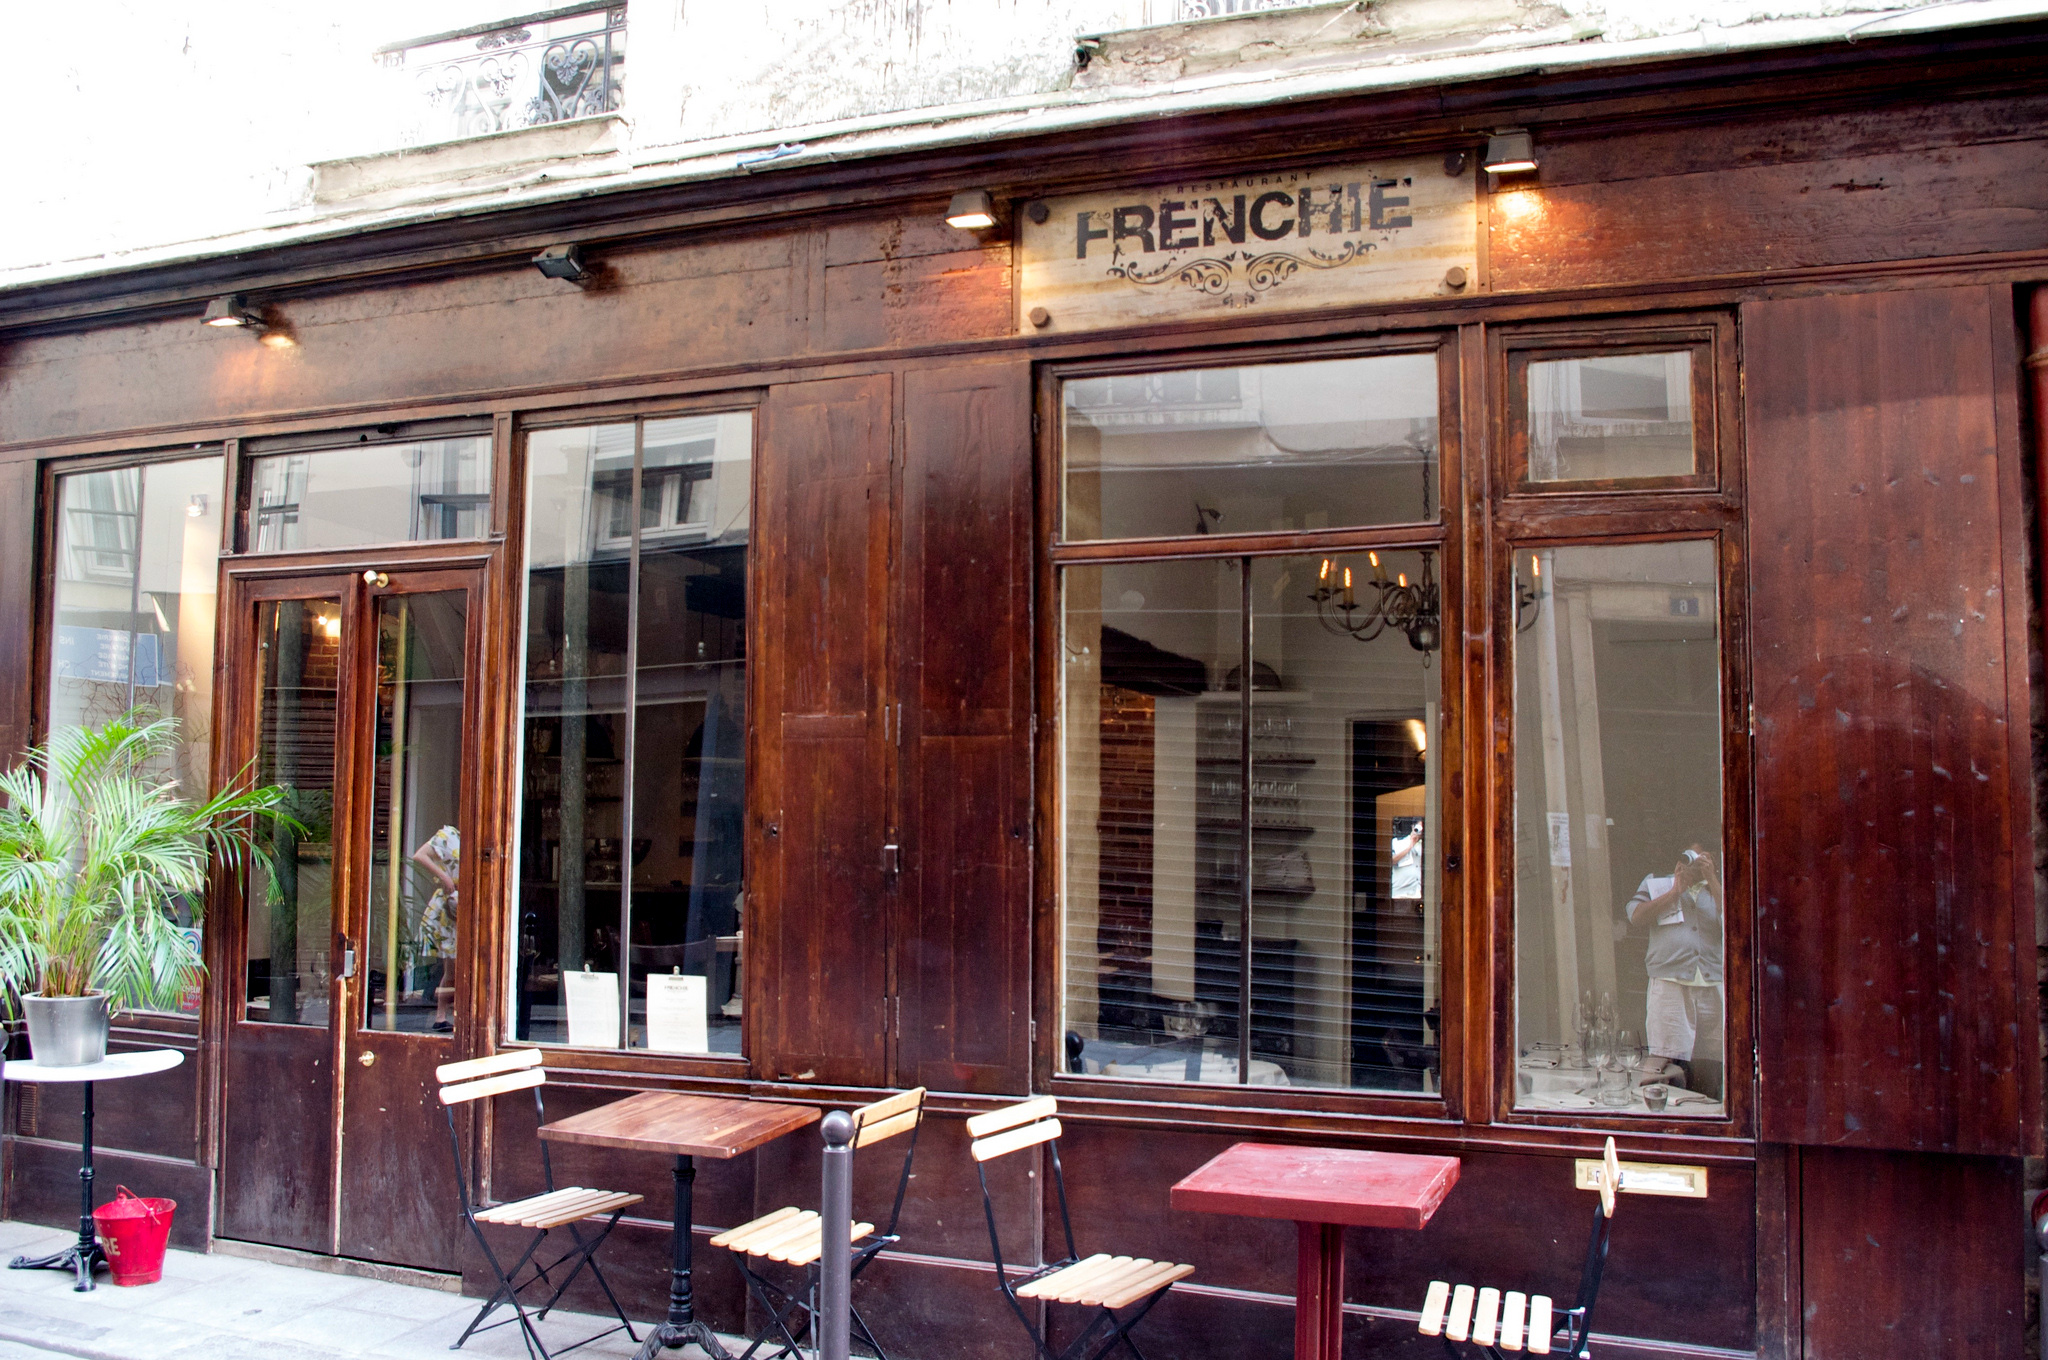 Exterior of Frenchie's in Paris. Photo by alphacityguides.